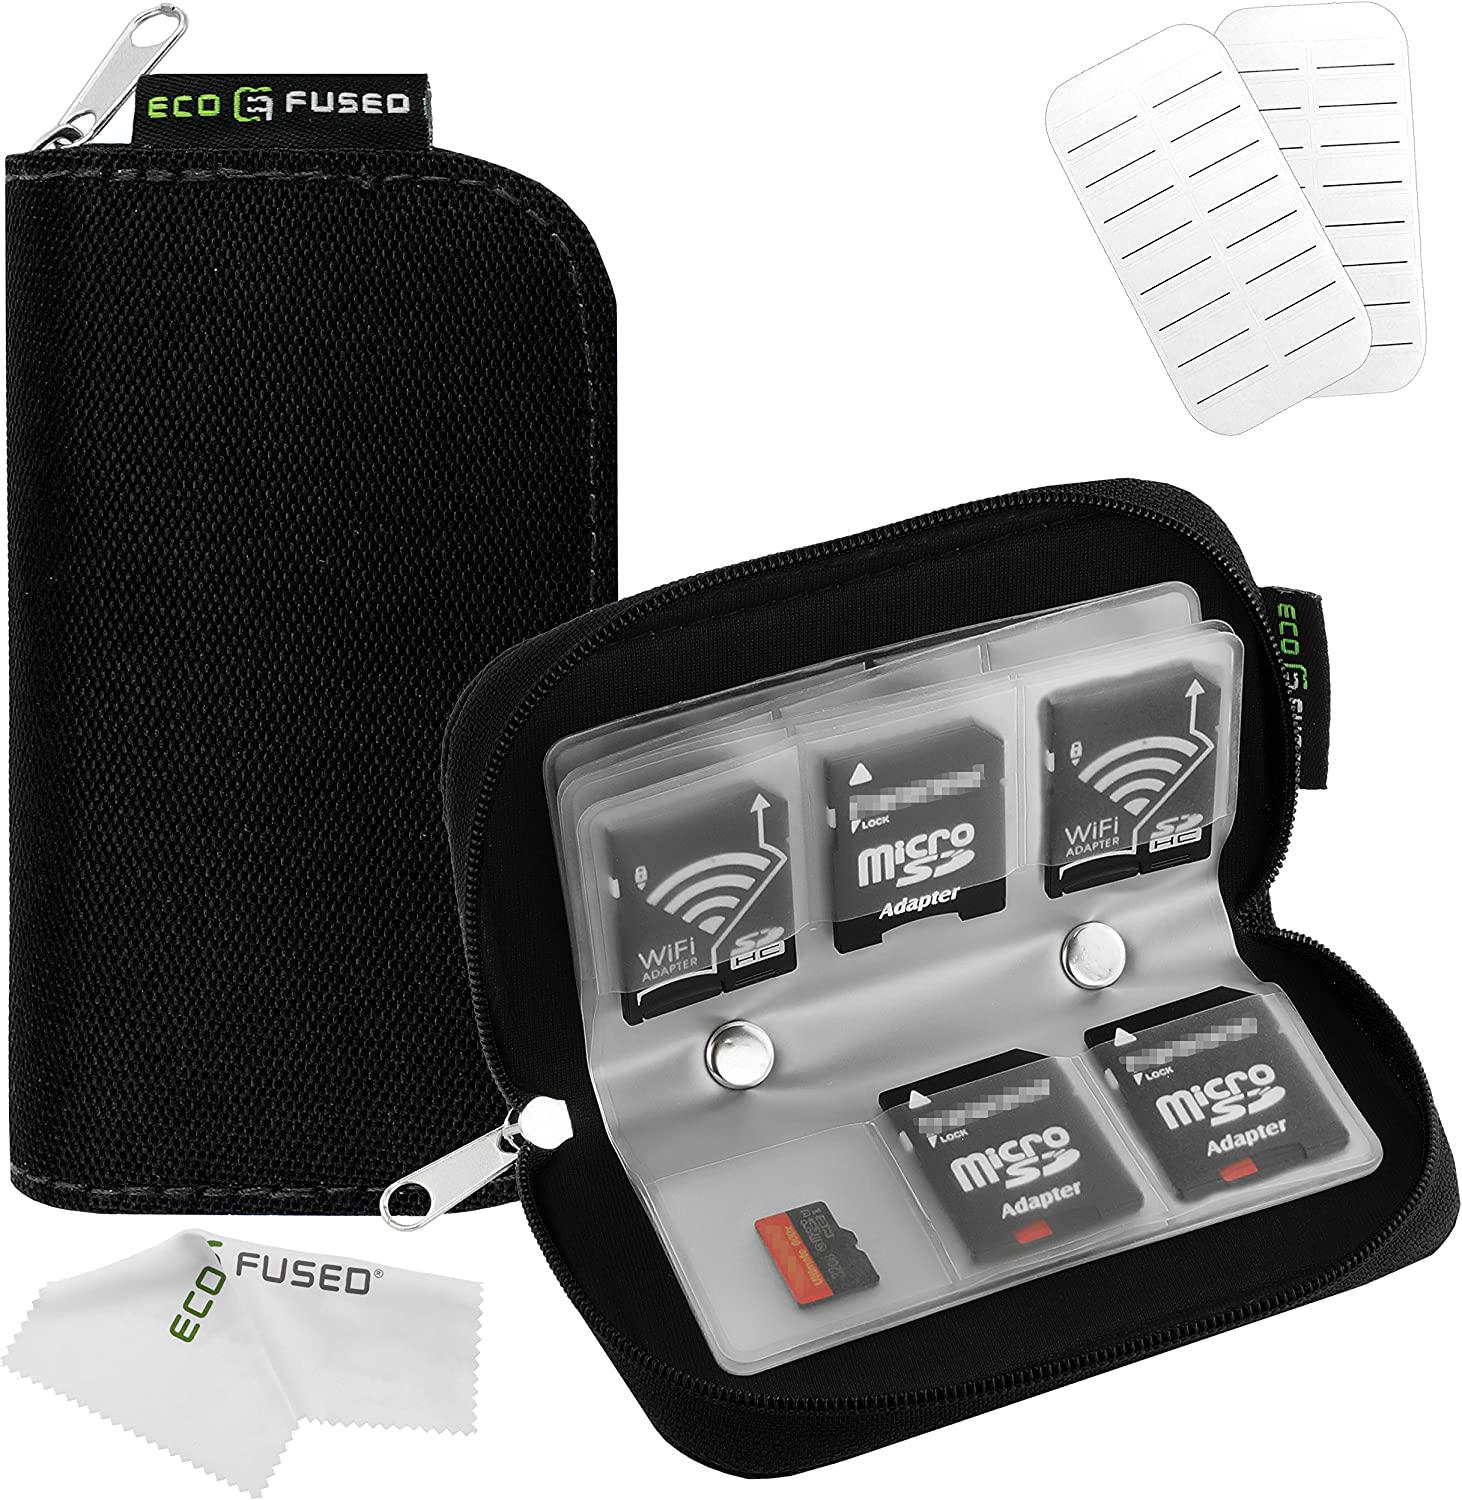 Eco-Fused, Eco-Fused Memory Card Carrying Case - Suitable for Sdhc and SD Cards - 8 Pages and 22 Slots - Microfiber Cleaning Cloth Included Black